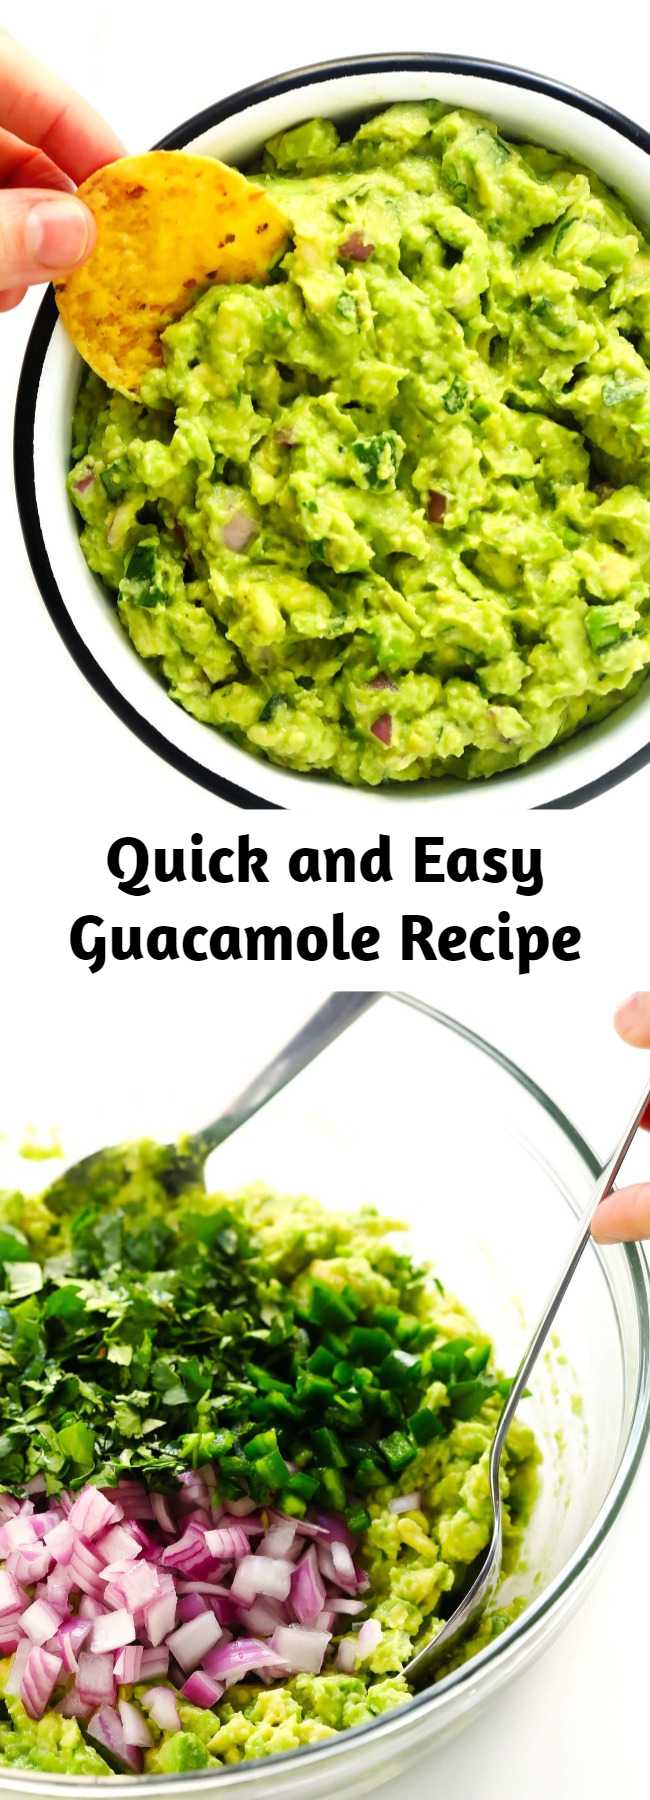 Truly the BEST guacamole recipe!  It’s quick and easy to make, naturally gluten-free and vegan, and always the hit of a party.